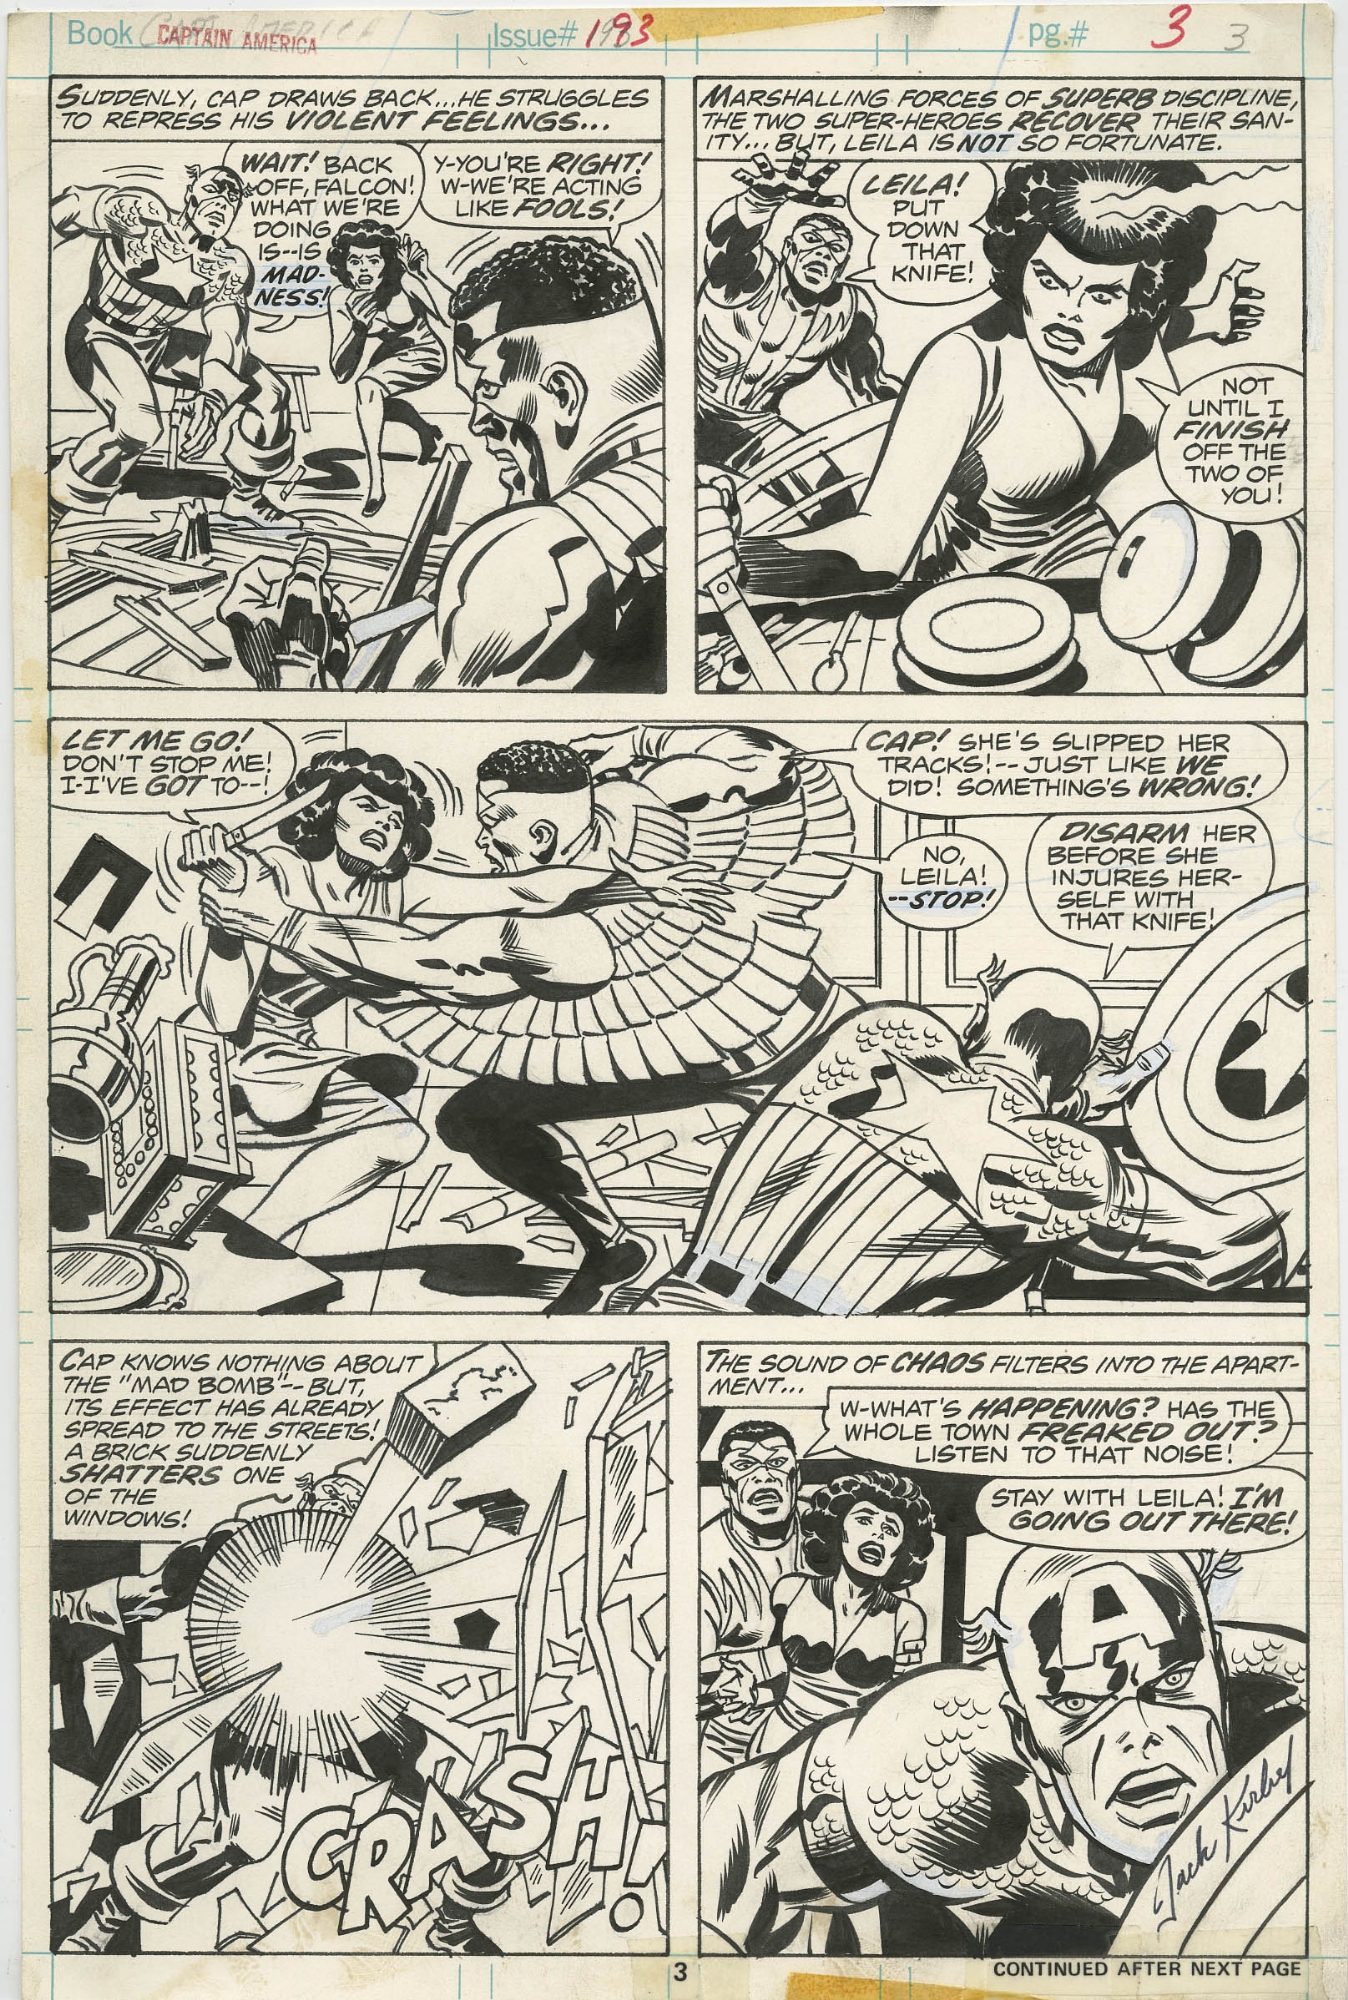 CAPTAIN AMERICA #193 PAGE (1976, JACK KIRBY ) CAP & THE FALCON BATTLE PAGE  FROM KIRBY'S HISTORIC RETURN TO MARVEL, in  Auctions's CLOSED  FEATURED AUCTION HIGHLIGHTS - 11-12/2017 Comic Art Gallery Room